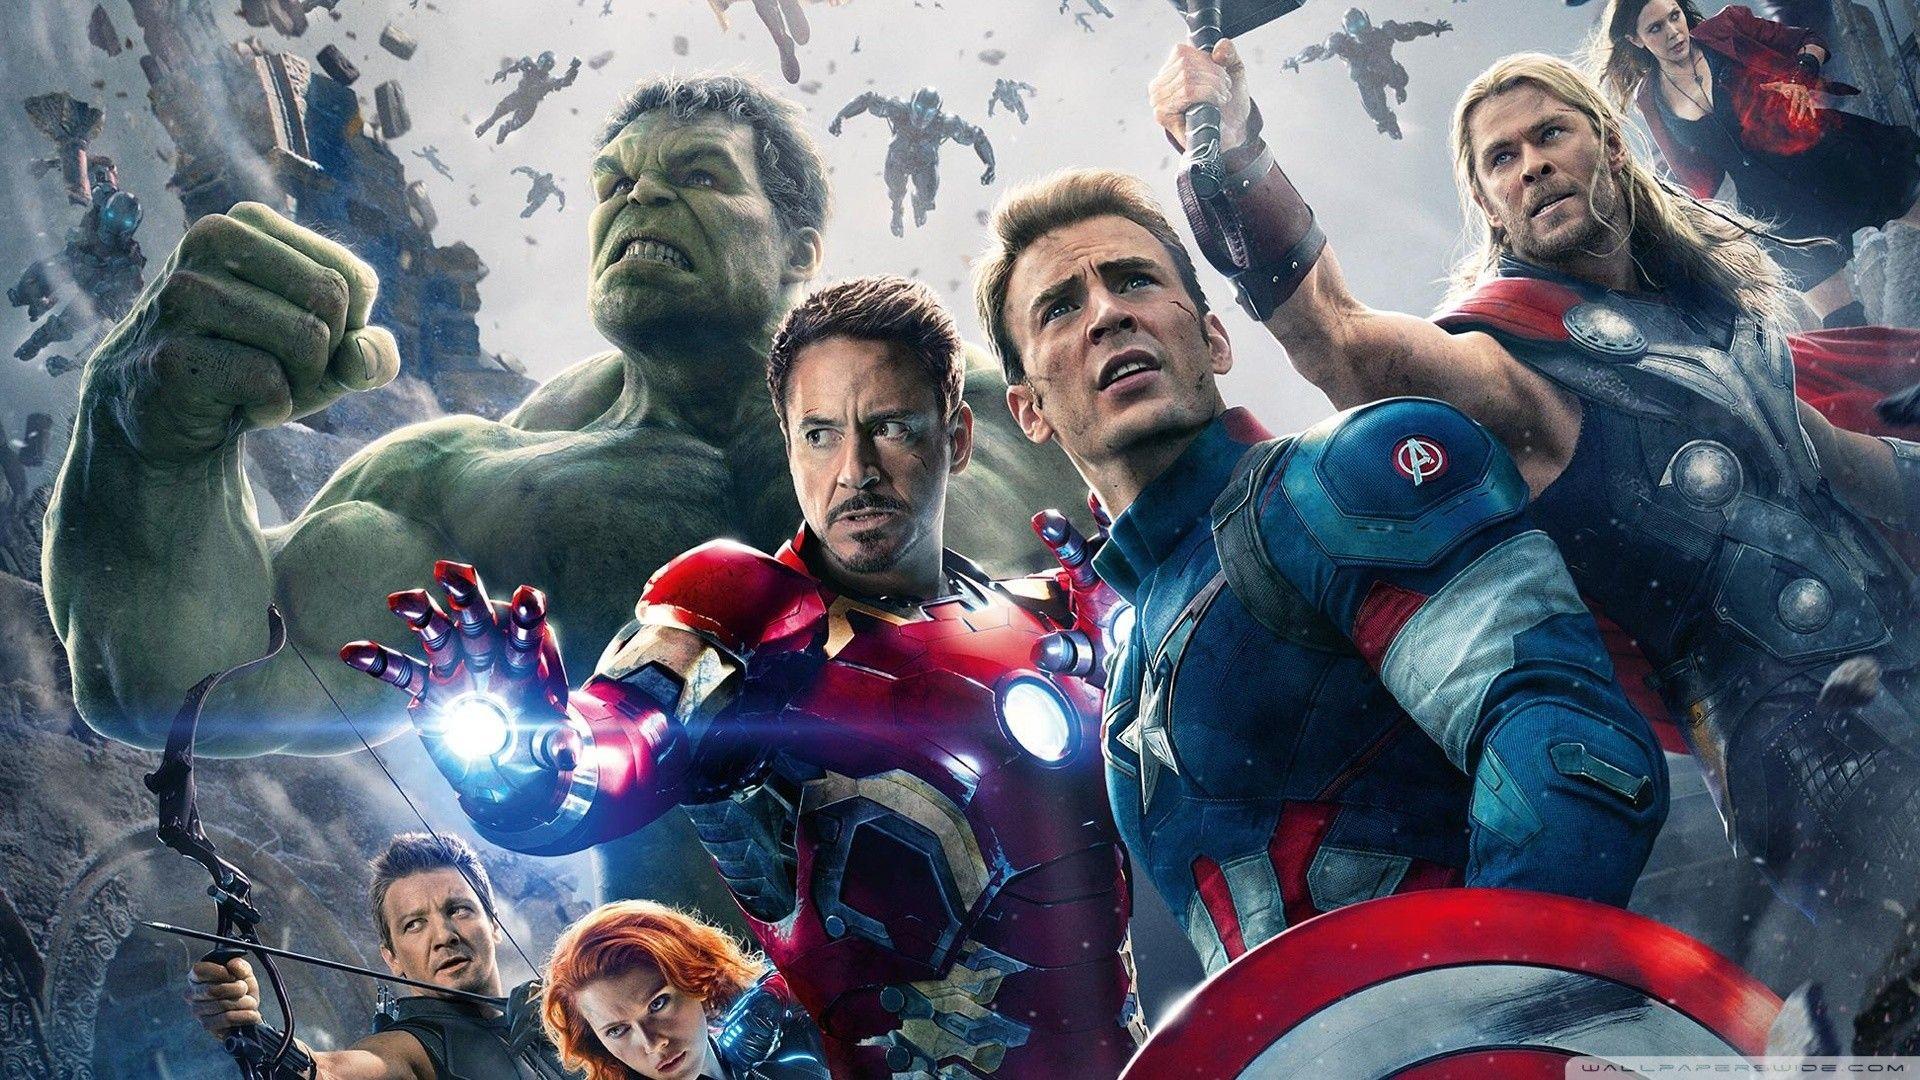 avengers movie hd wallpapers 1080p